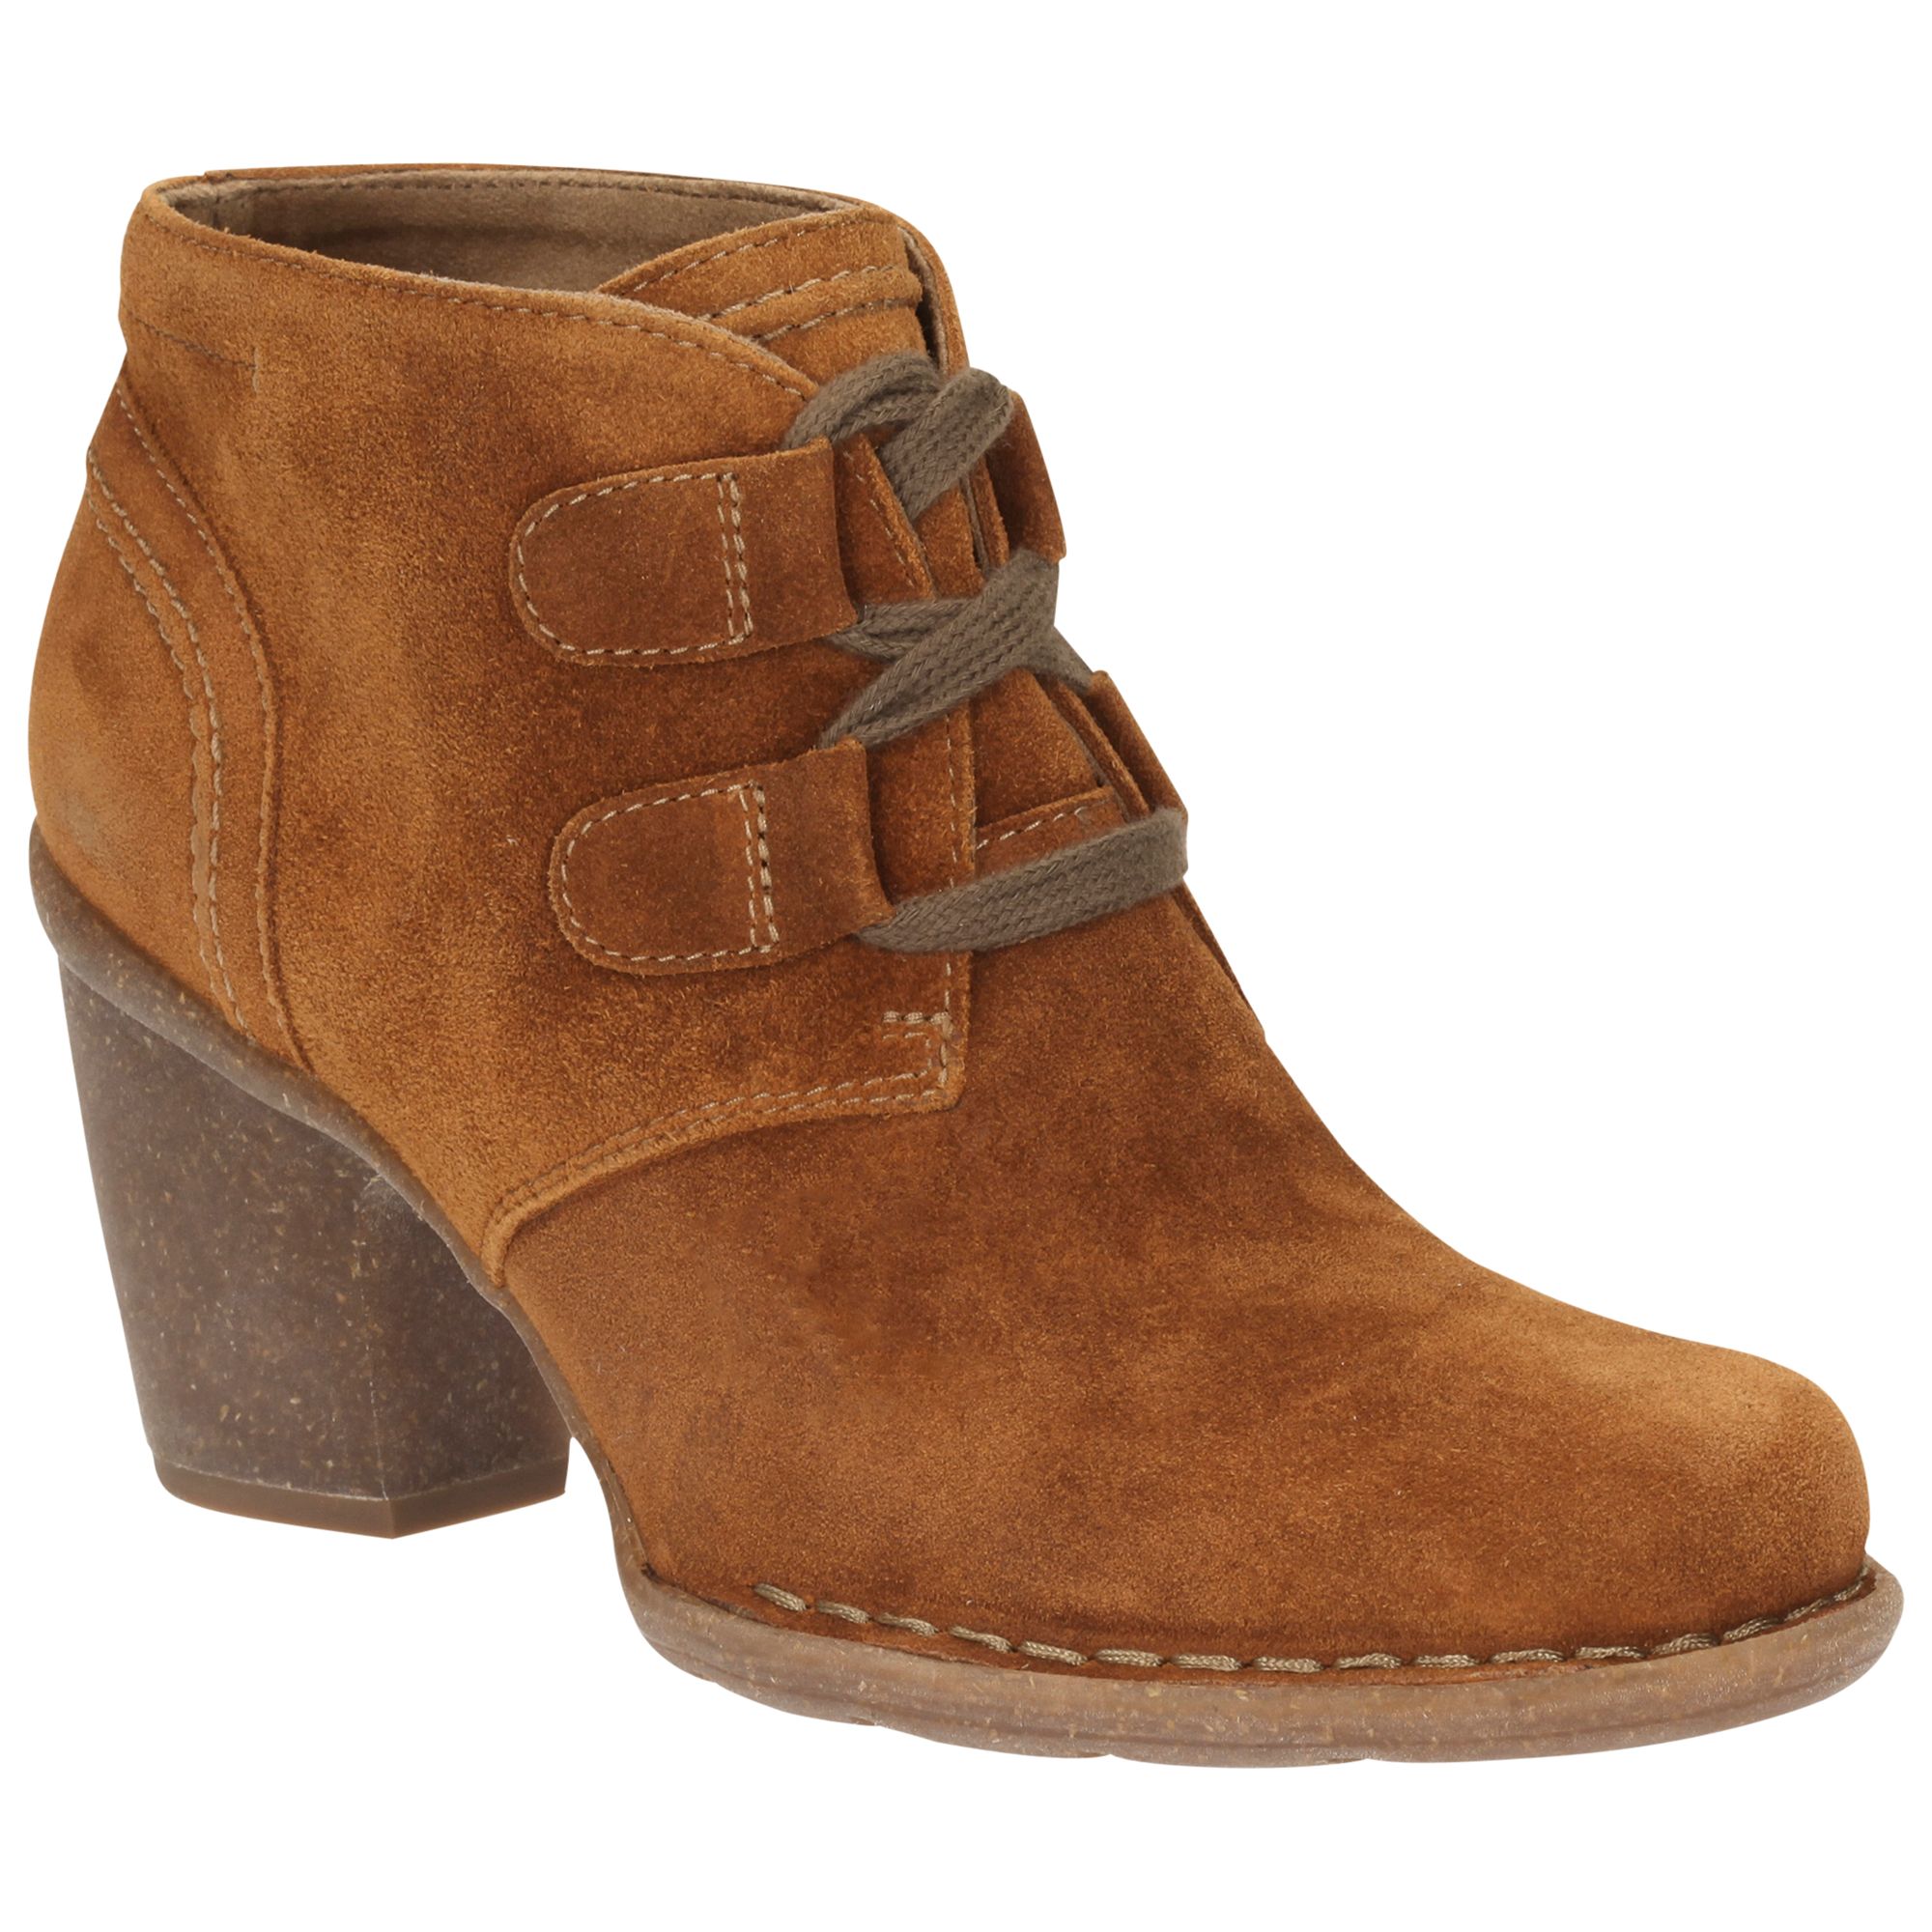 clarks ladies suede ankle boots